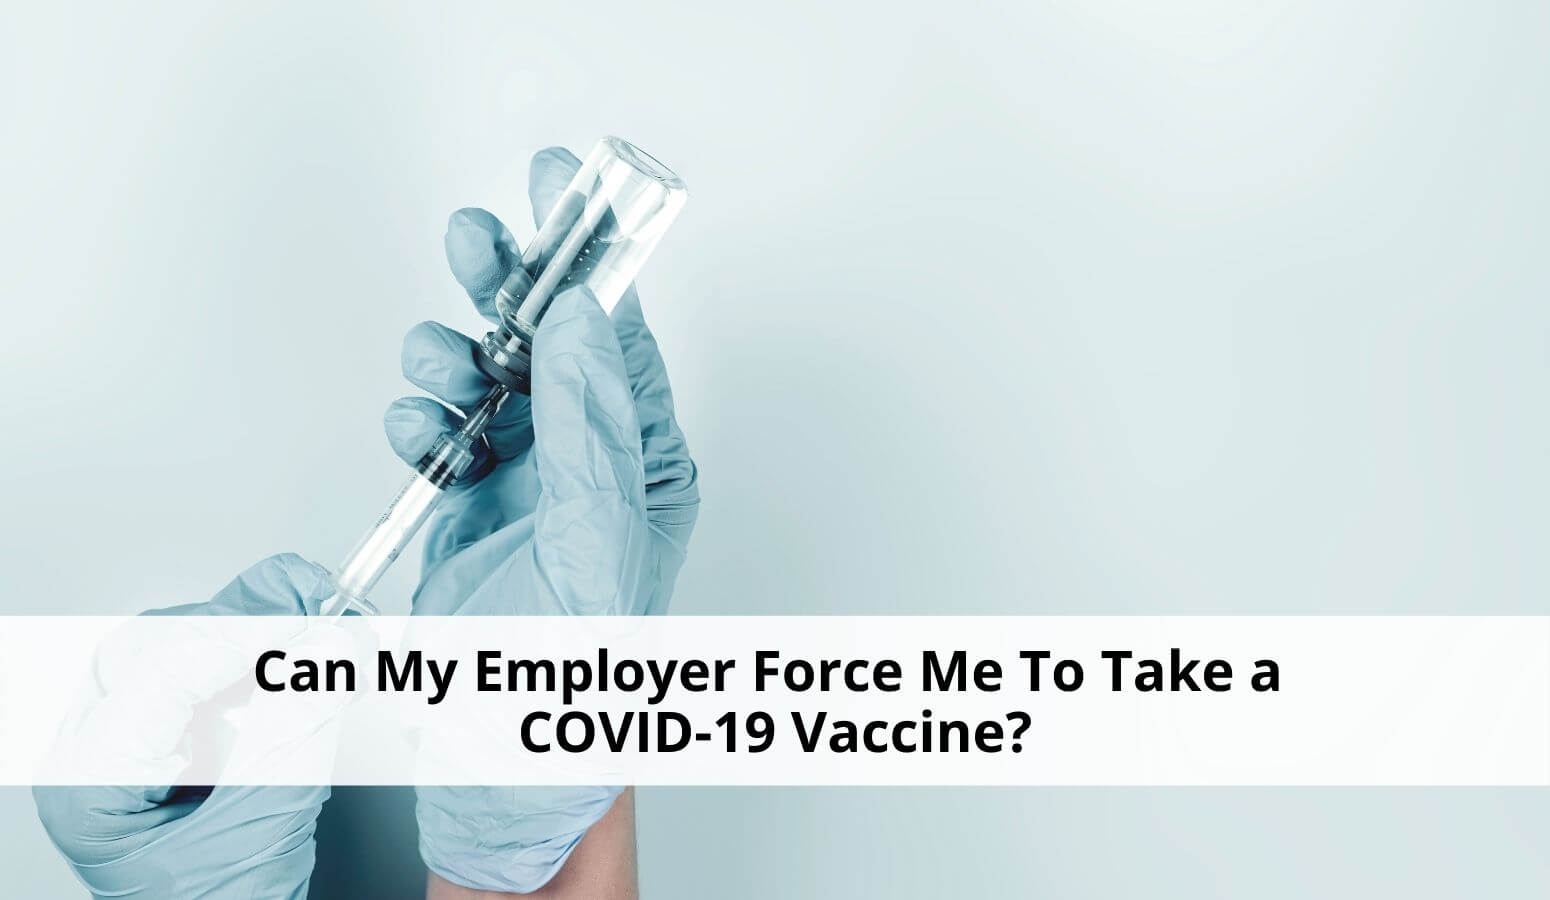 Featured image for “Can My Employer Force Me To Take a COVID-19 Vaccine?”